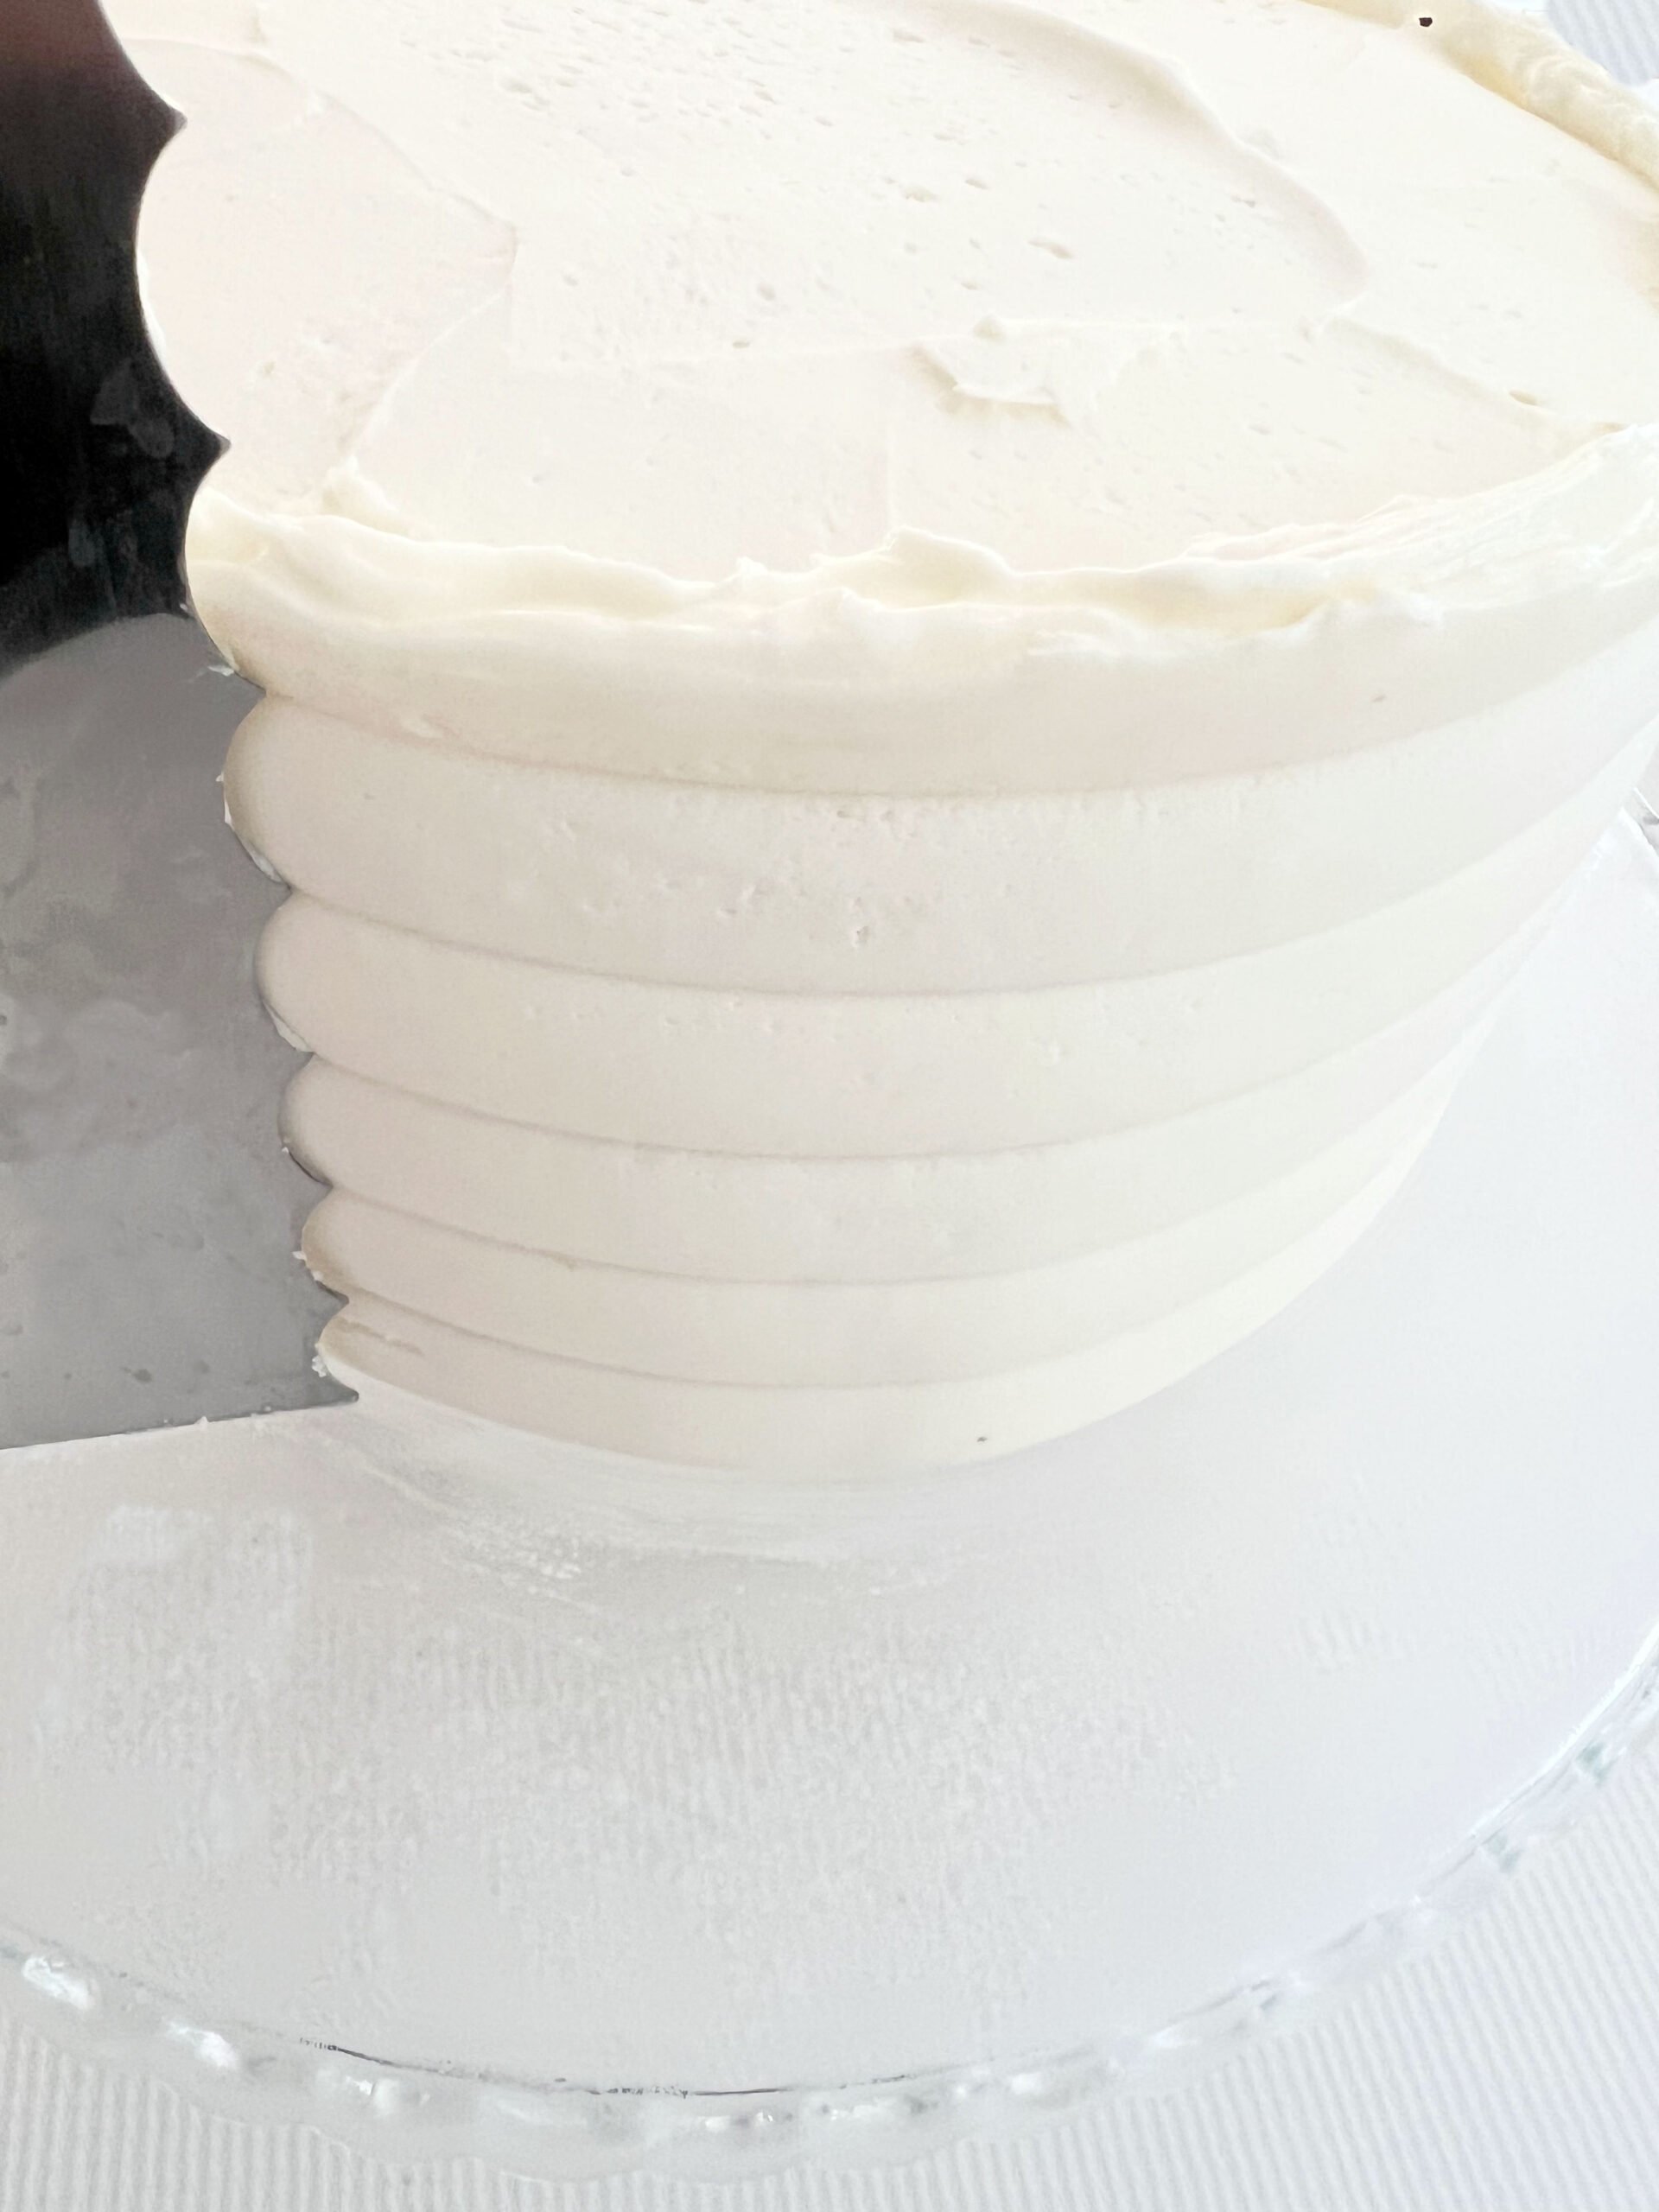 Combing the frosted cake around the sides with a cake comb.